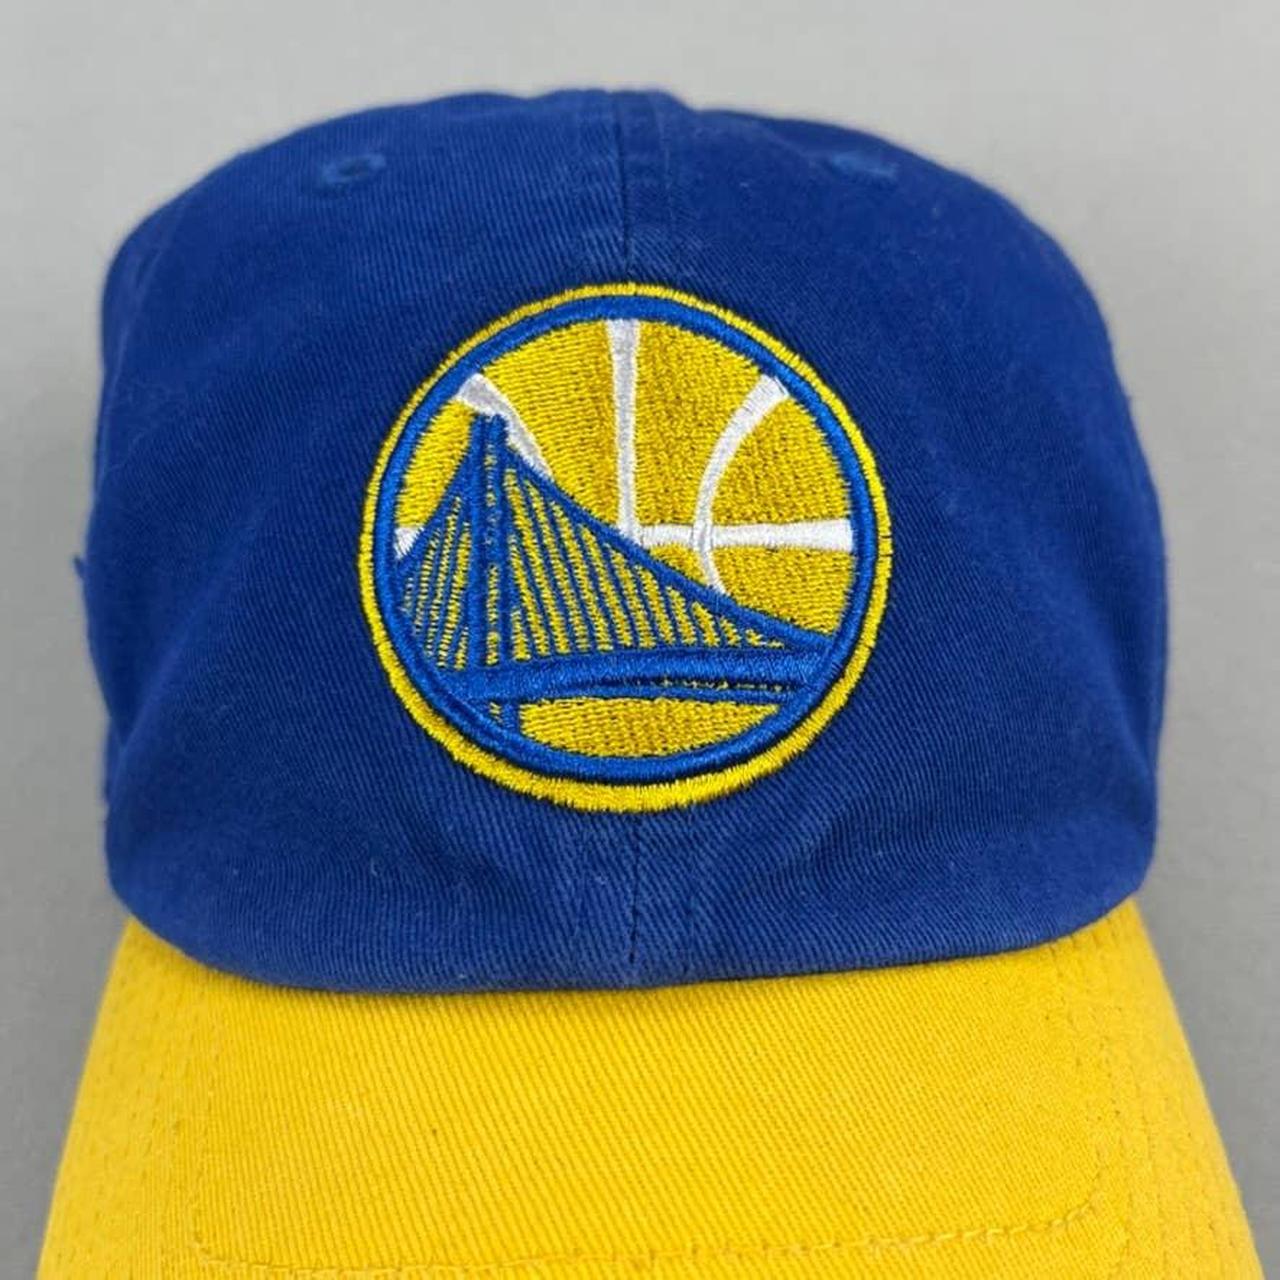 NBA Men's Blue and Yellow Hat (2)